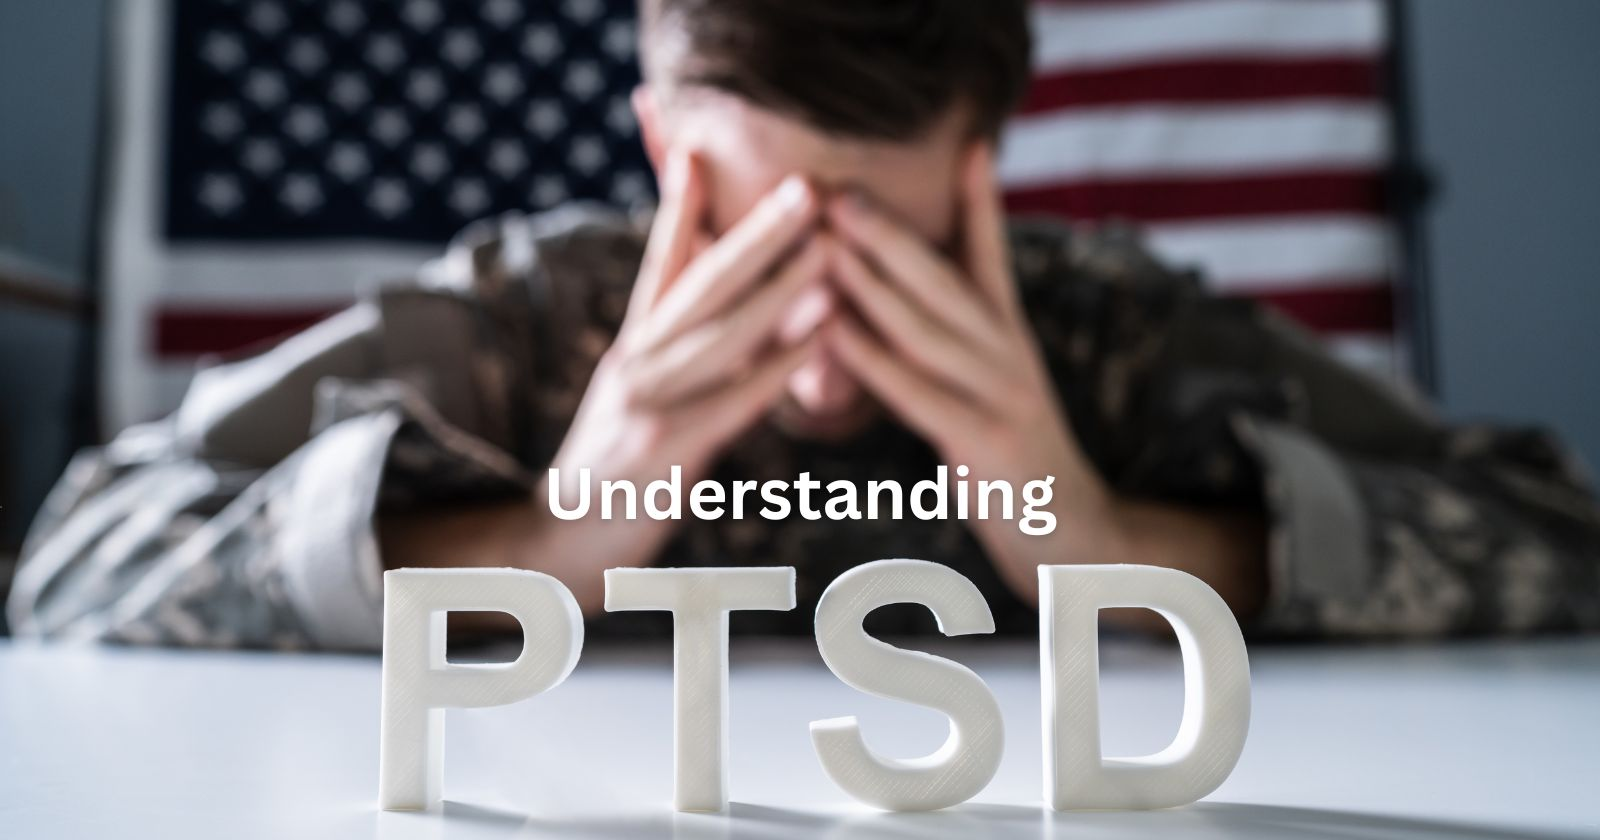 Understanding PTSD

A male military veteran in a deep thinking